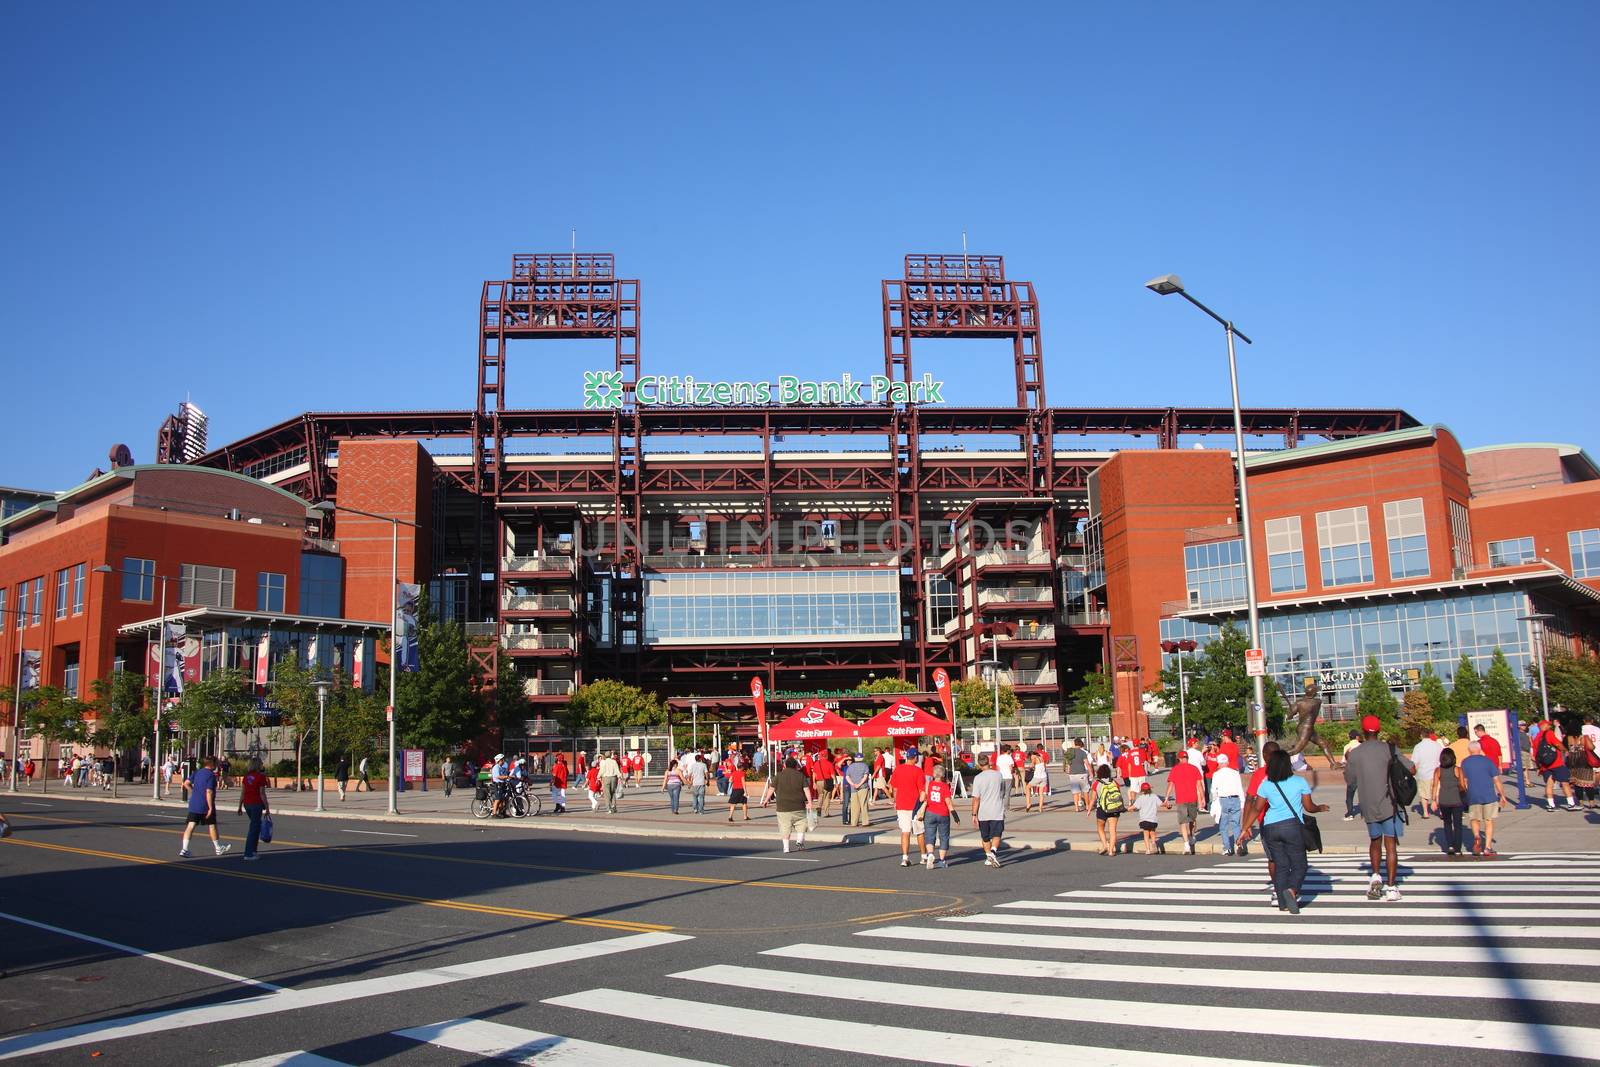 Fans arrive at the Phillies concrete and old fashioned brick ballpark in South Philadelphia sports complex.